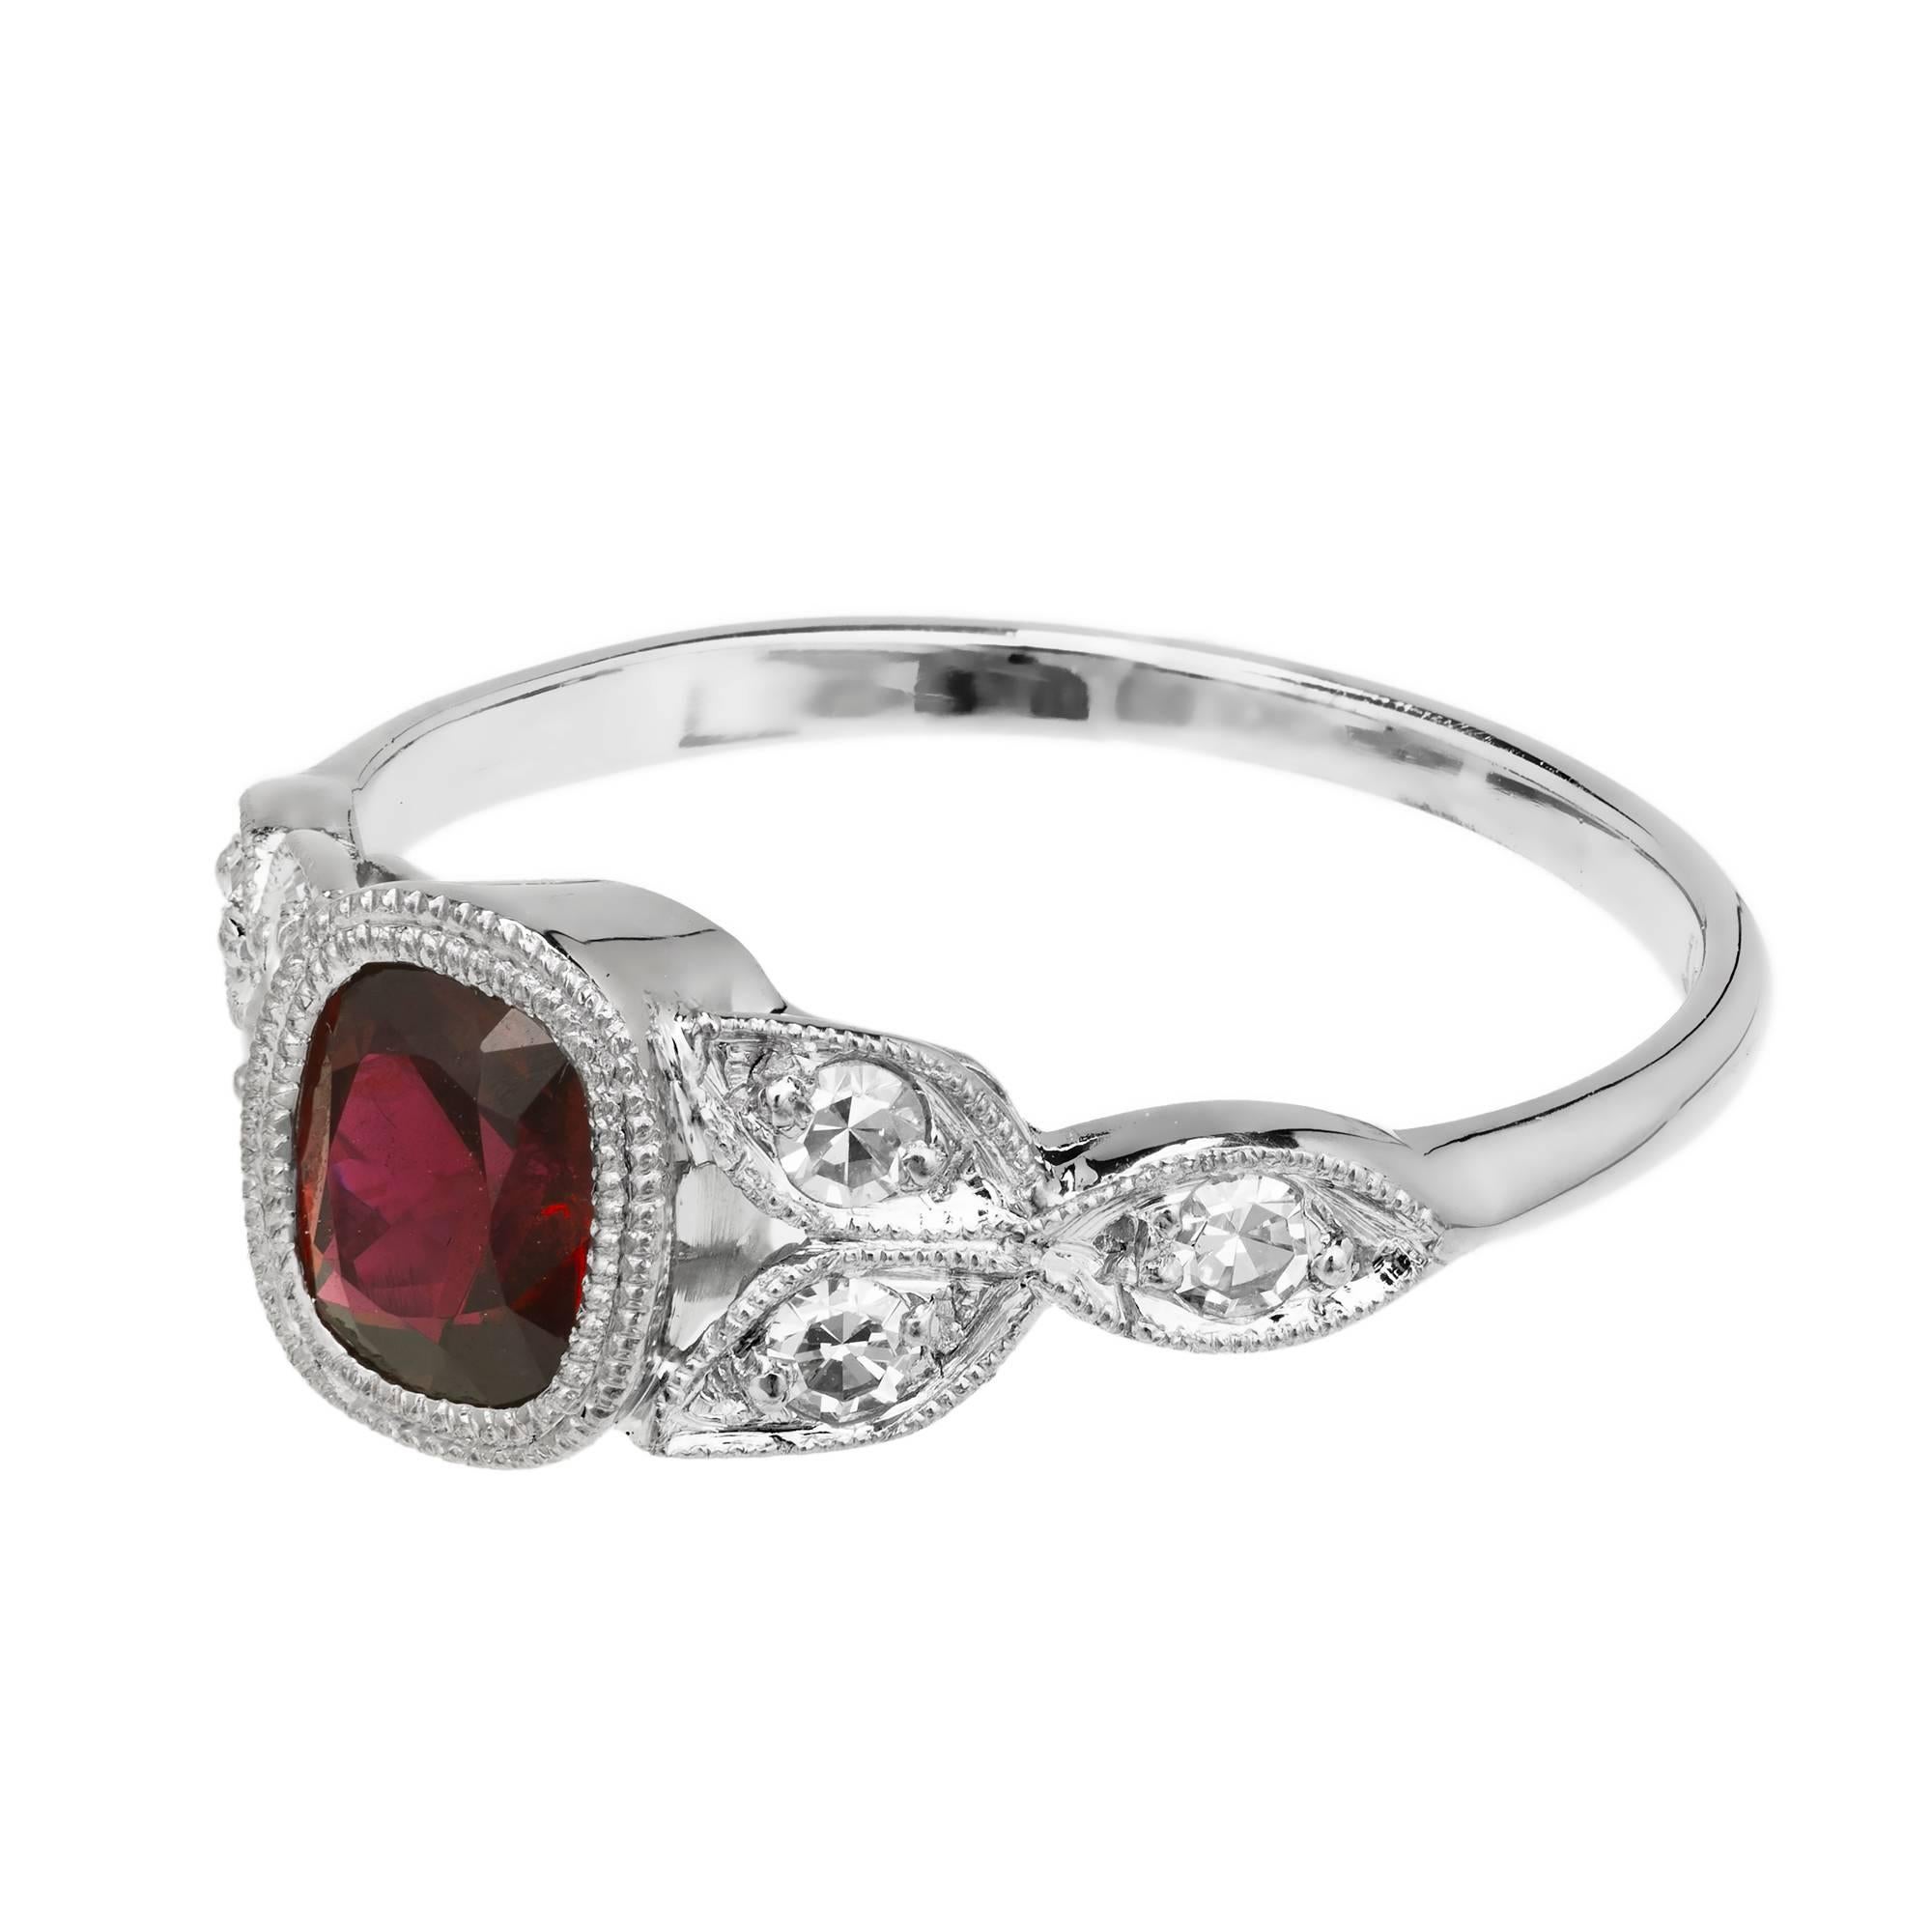 Vintage 1930's ruby and diamond engagement ring. GIA certified cushion cut natural Ruby no heat no enhancements, in a platinum setting with six round accent diamonds. 

1 cushion vivid red Ruby, approx. total weight .66cts, 5.76 x 4.90x 3.23mm,